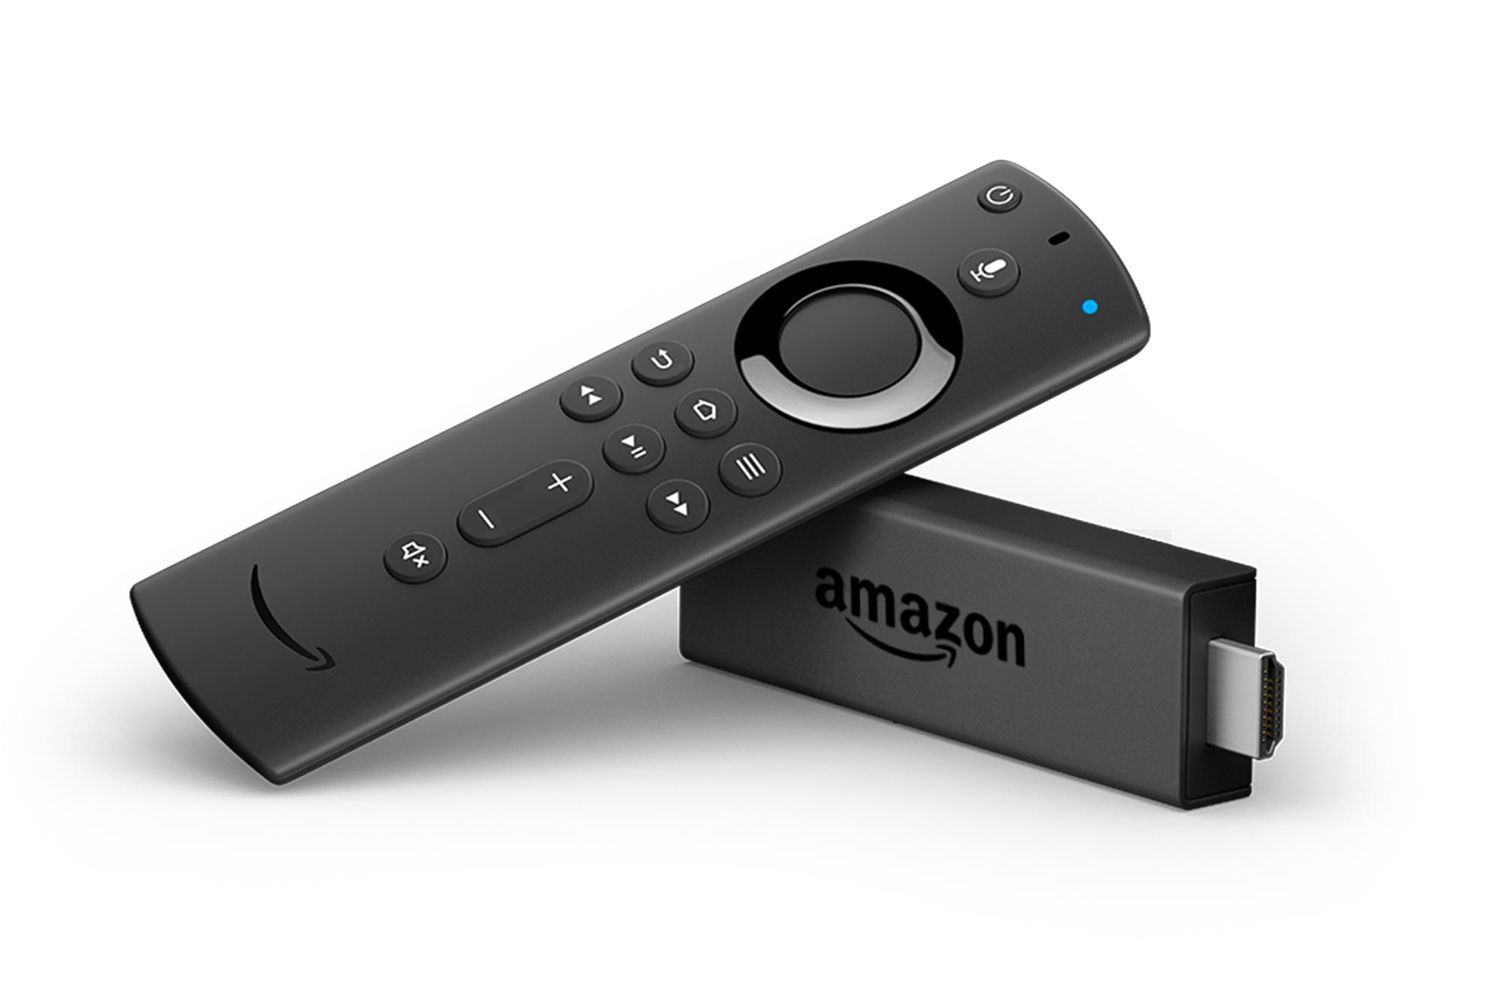 A Complete Guide To Pairing Your Xfinity Remote: Master the Art of Remote Control Connection